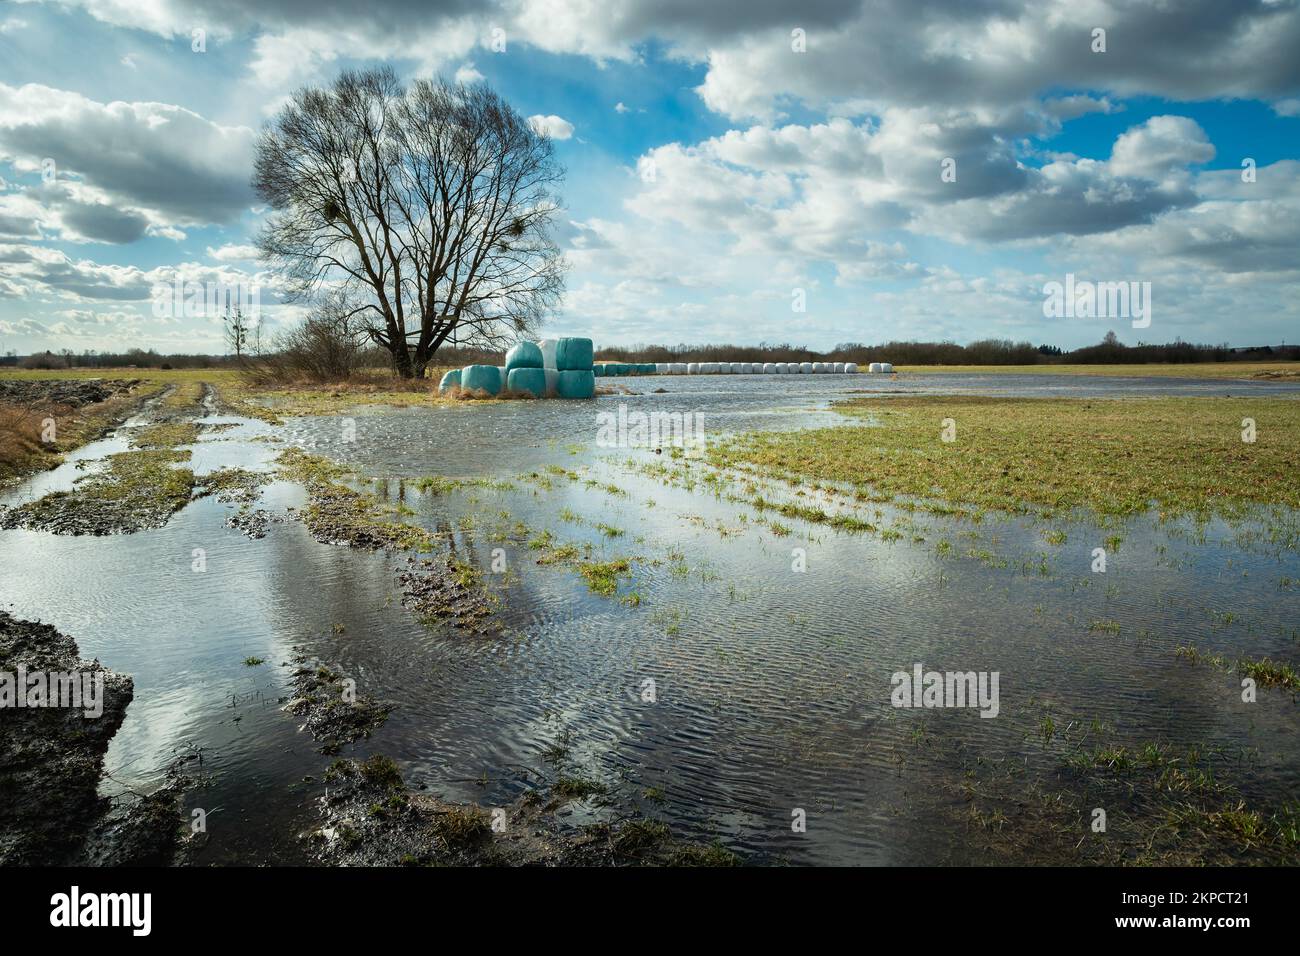 A flooded meadow after melting snow, a large tree and a clear sky, Nowiny, Poland Stock Photo